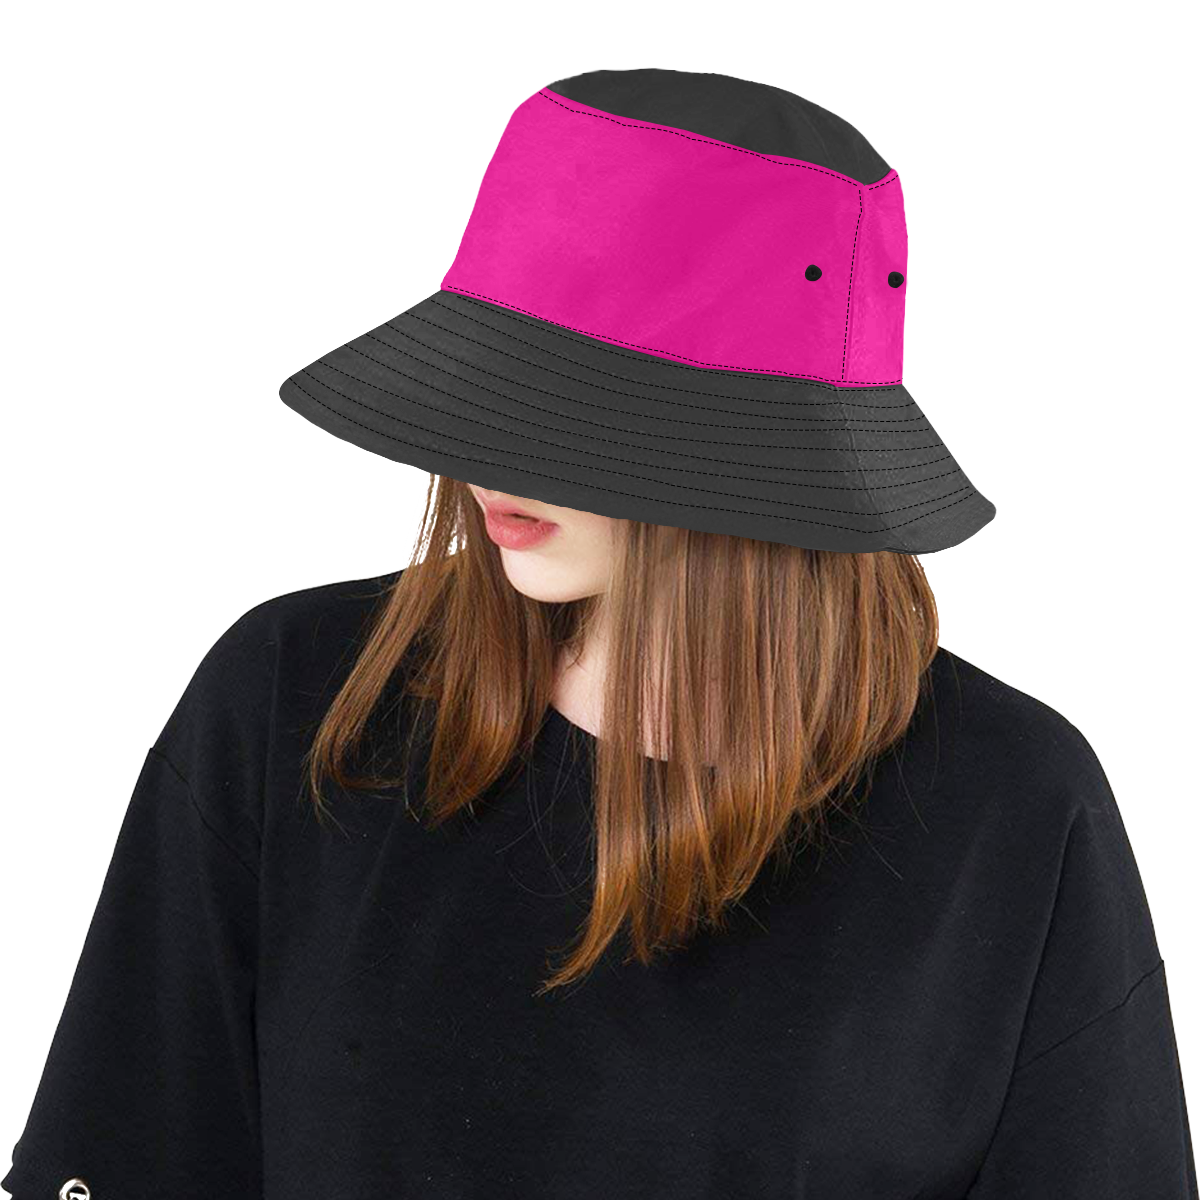 solid colors black and pink All Over Print Bucket Hat